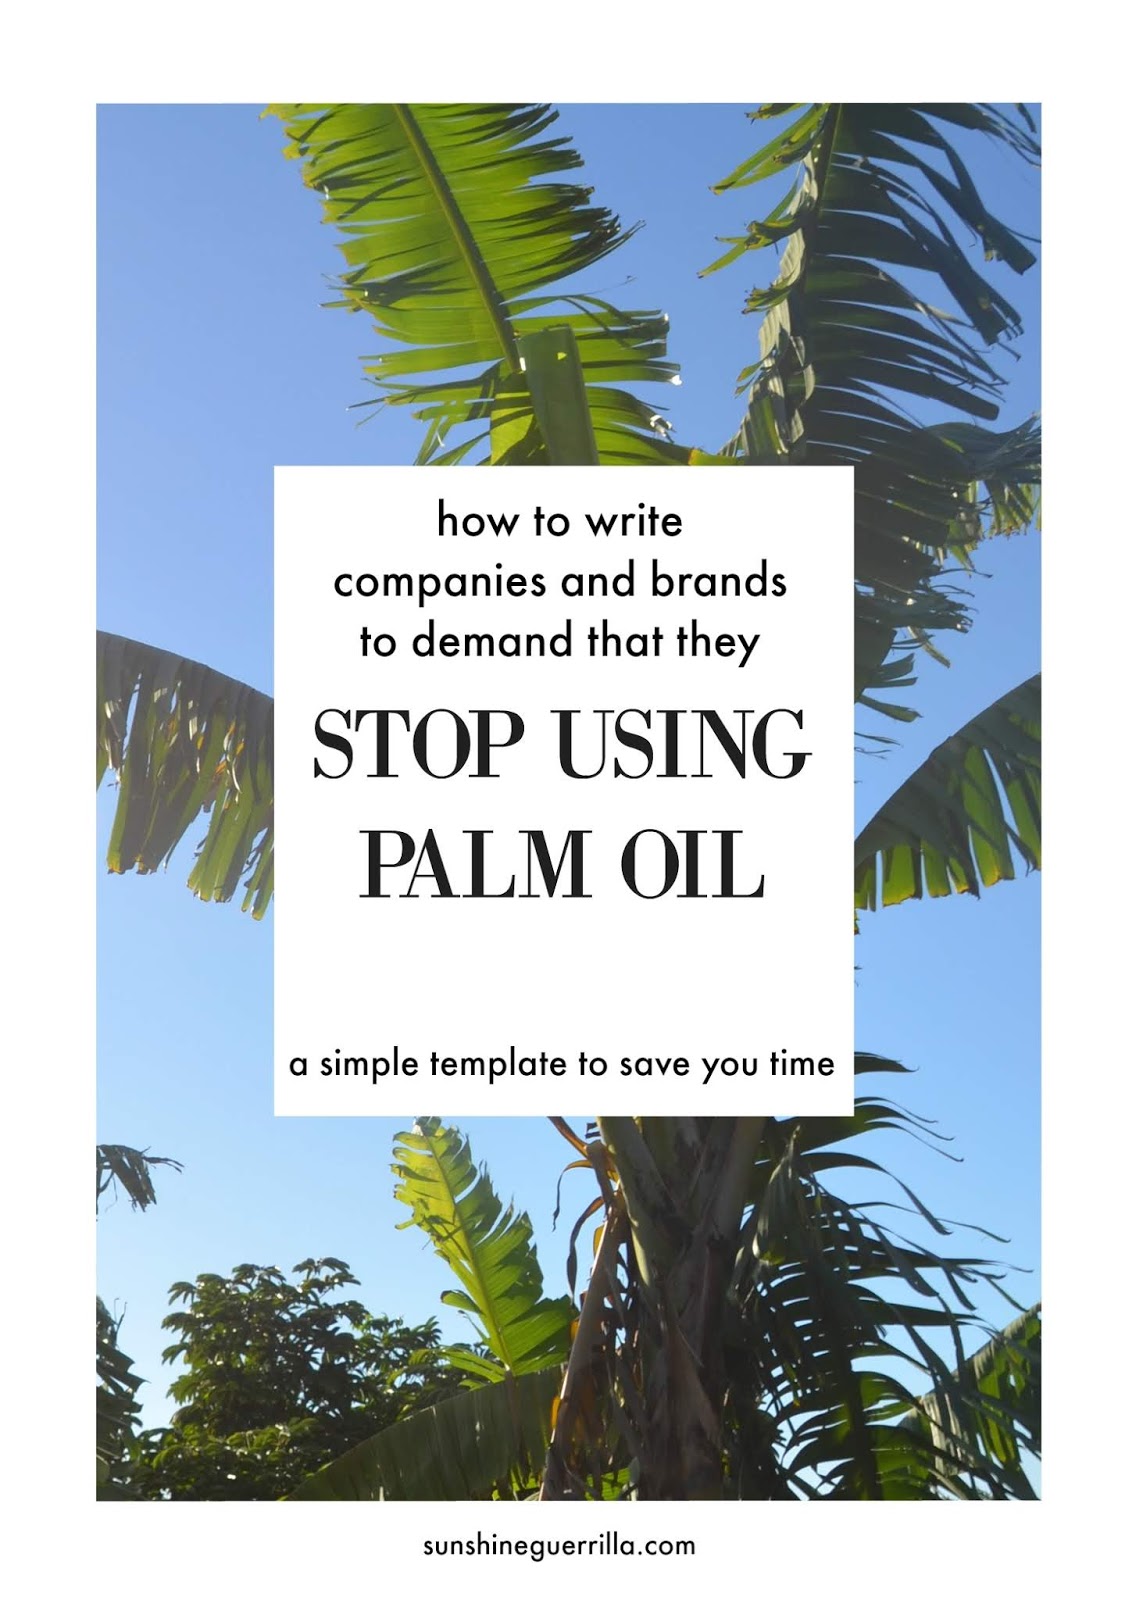 How to Write Companies to Ask them to Stop Using Palm Oil - Sunshine